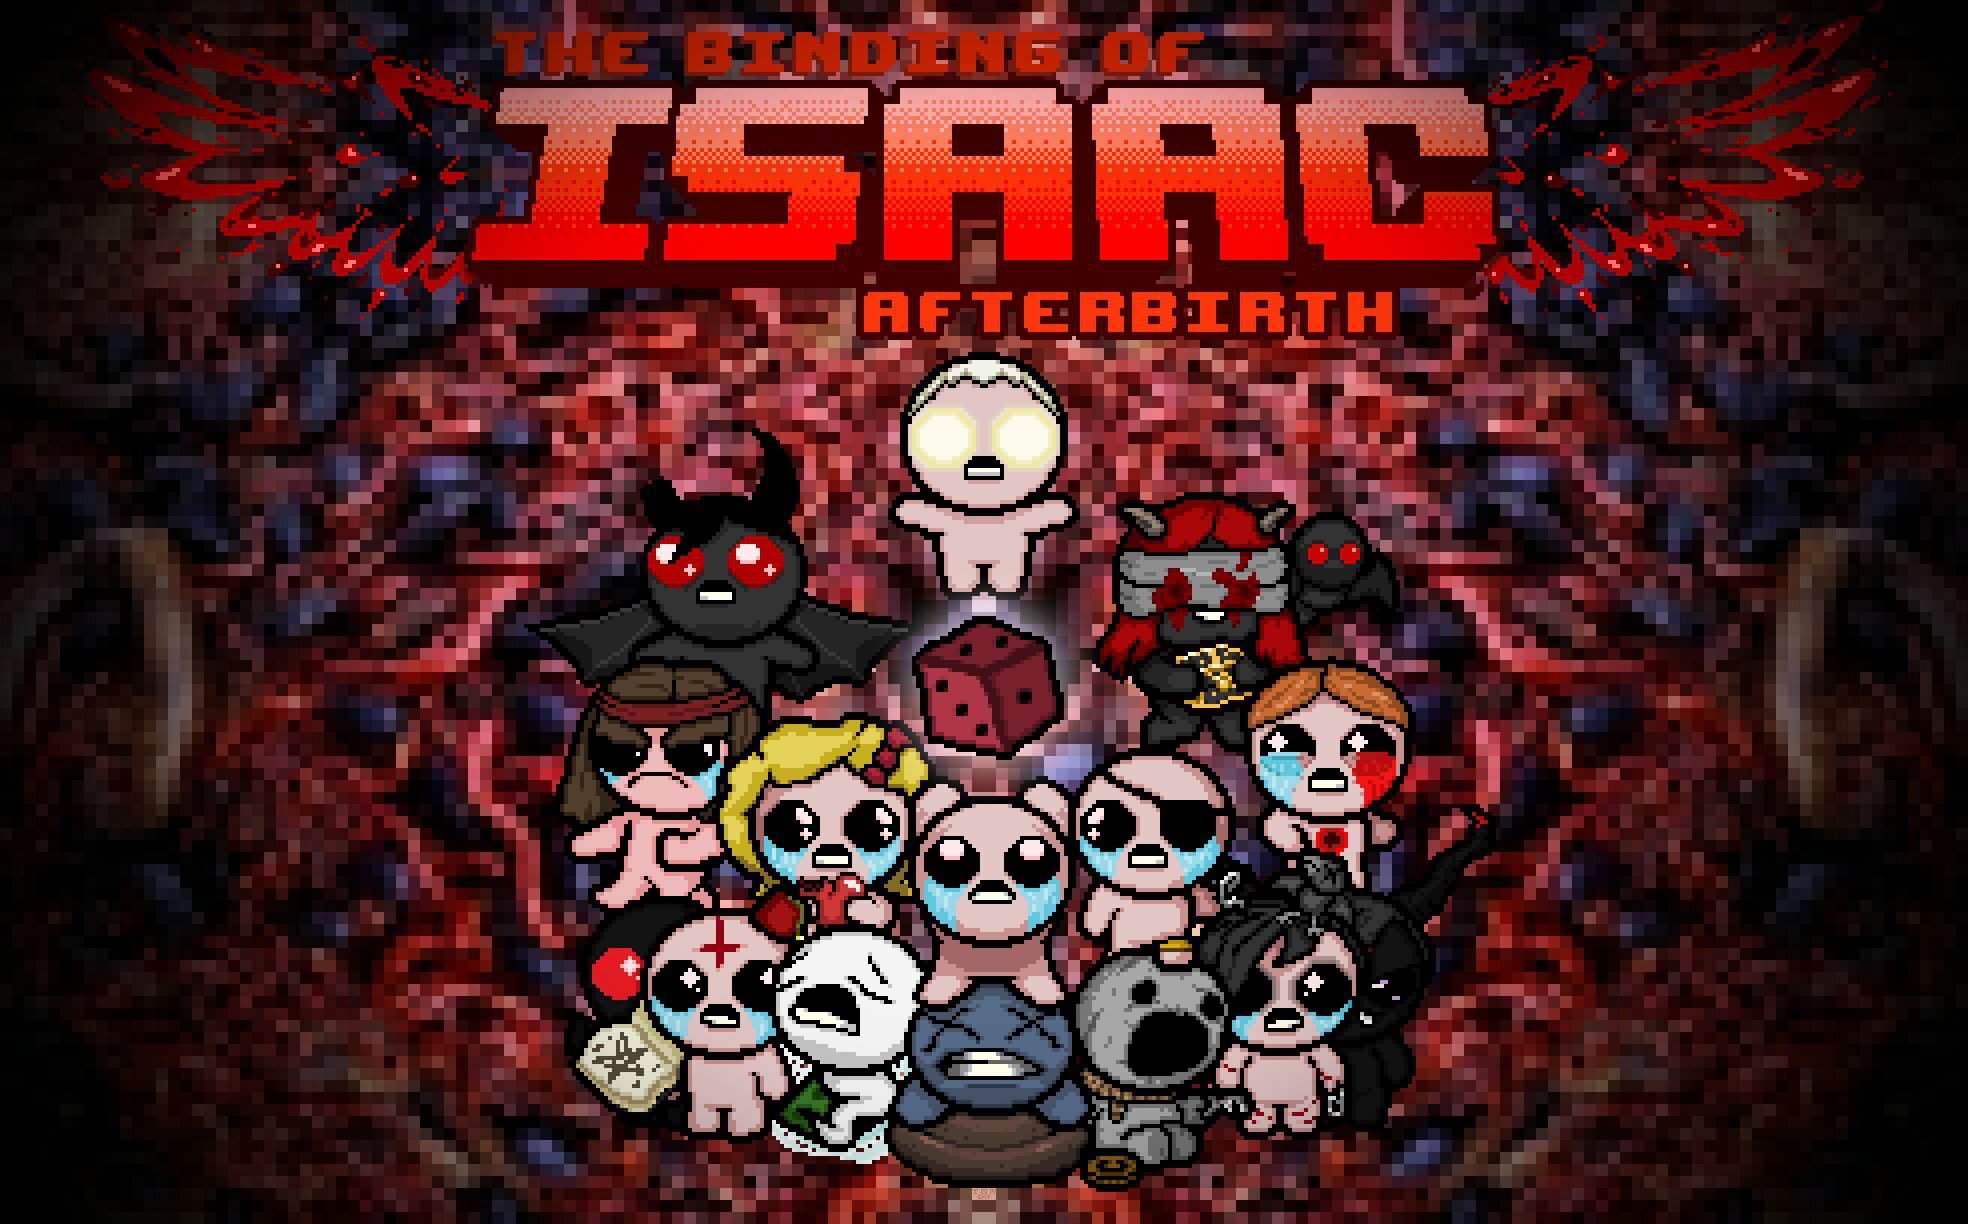 download isaac the game